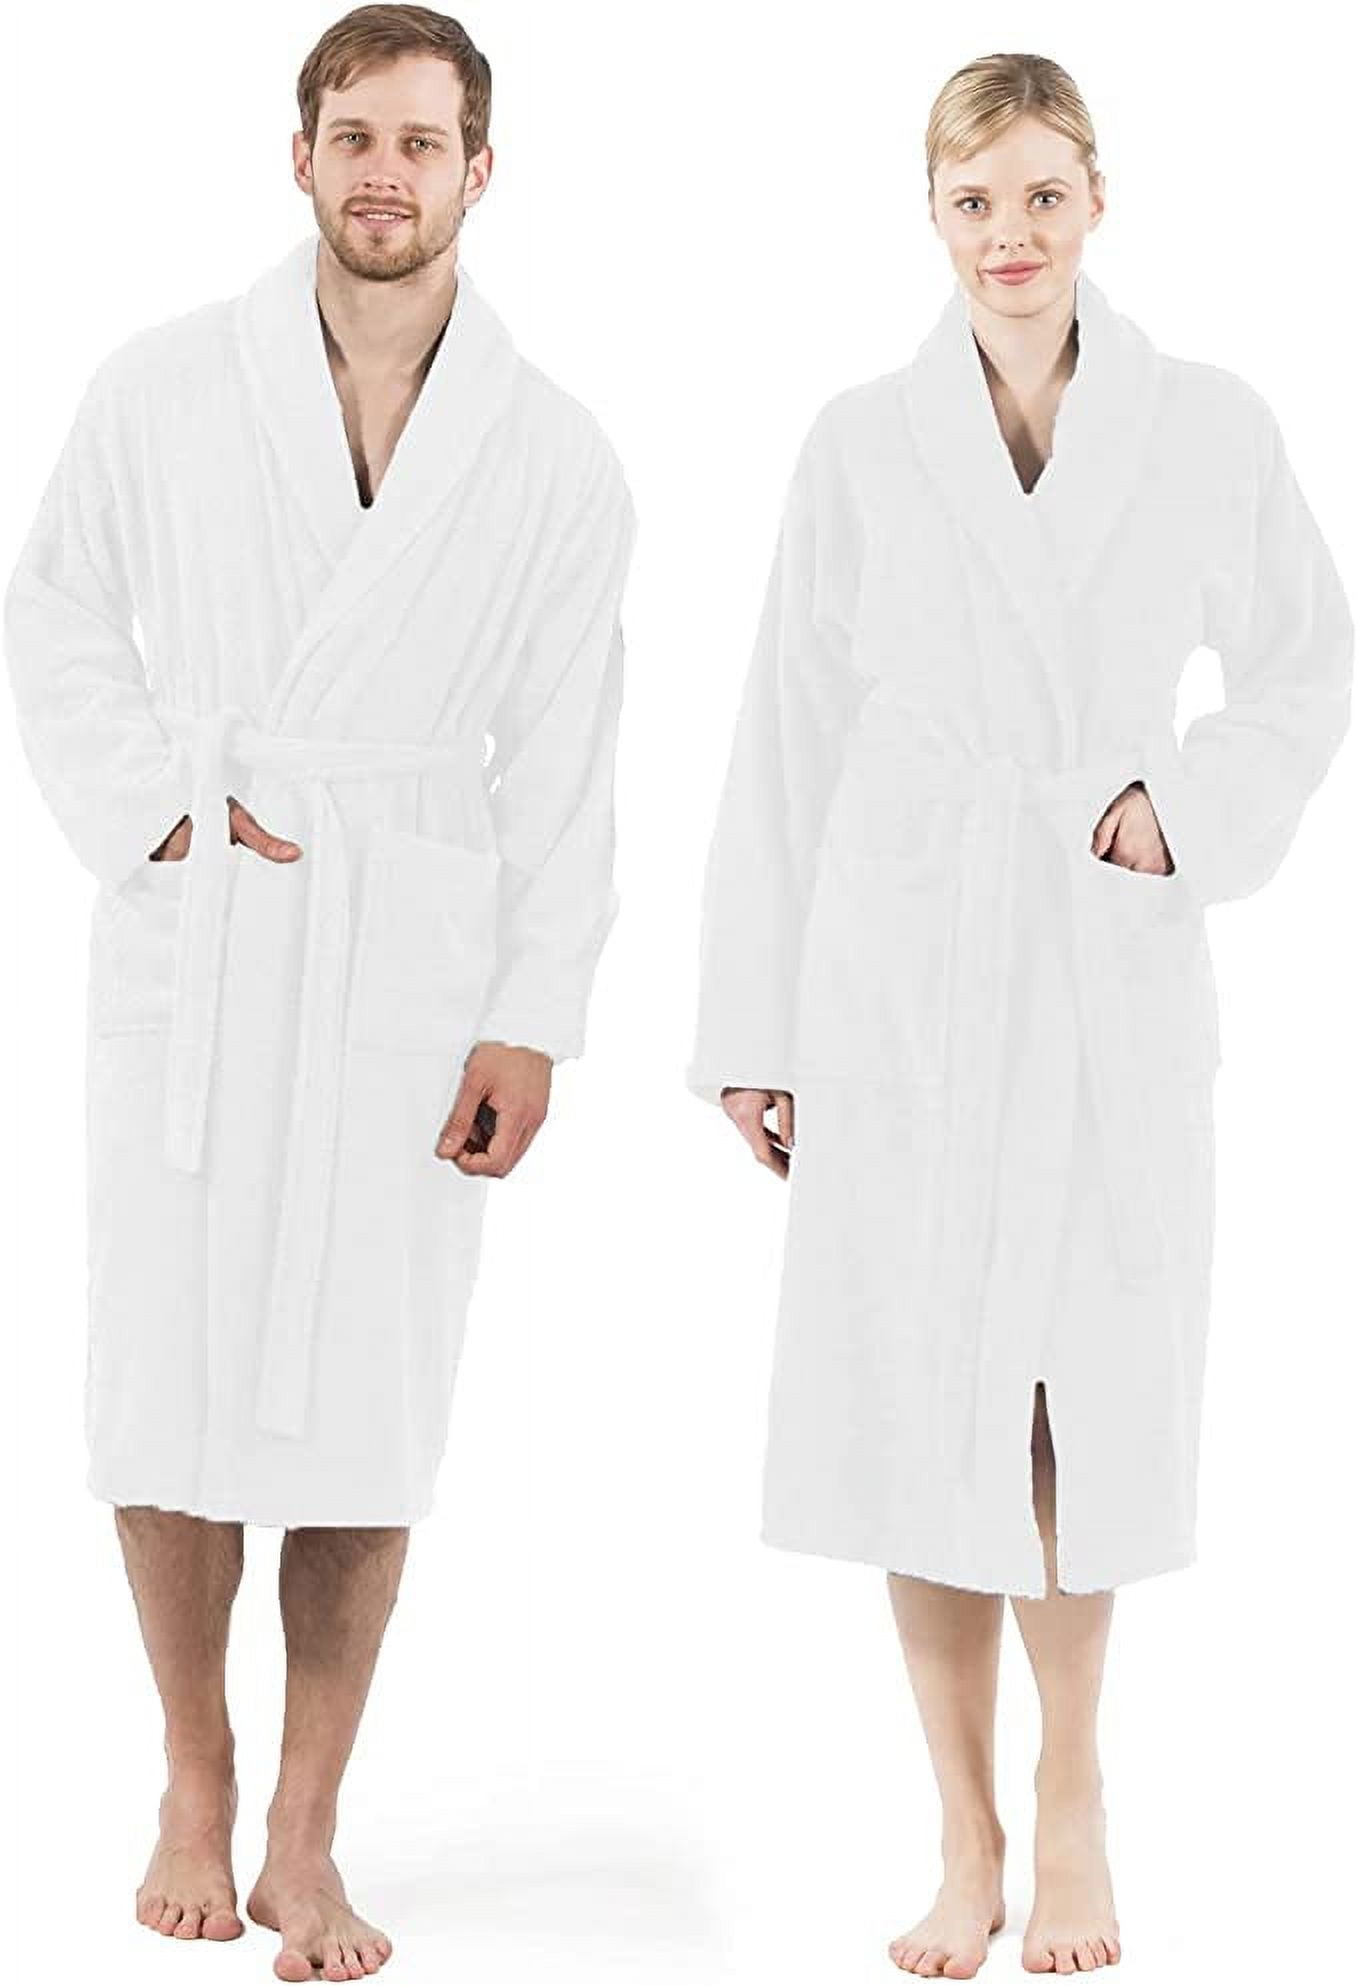 DAN RIVER Terry Cloth Robes for Women and Men - Lightweight 100% Cotton ...